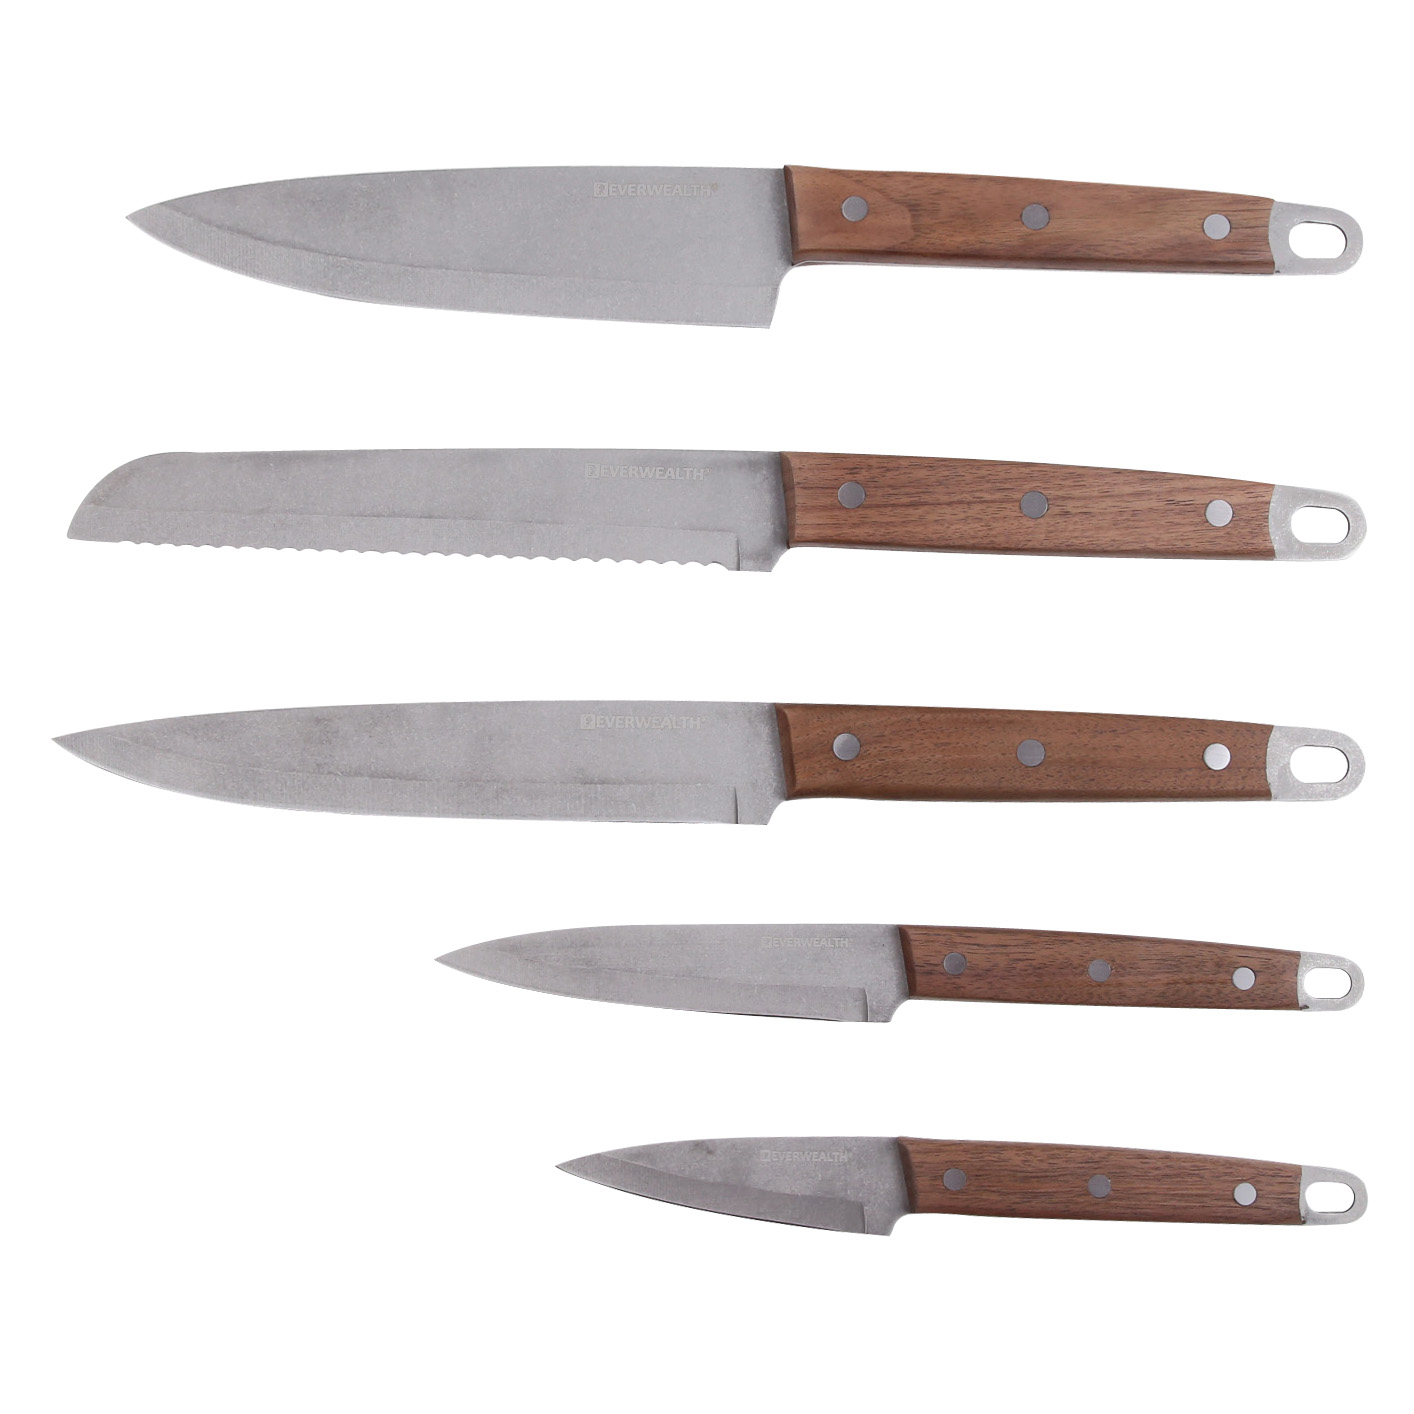 8 Inch Wood Handle Stainless Steel Kitchen Knife Cutlery Set - M013